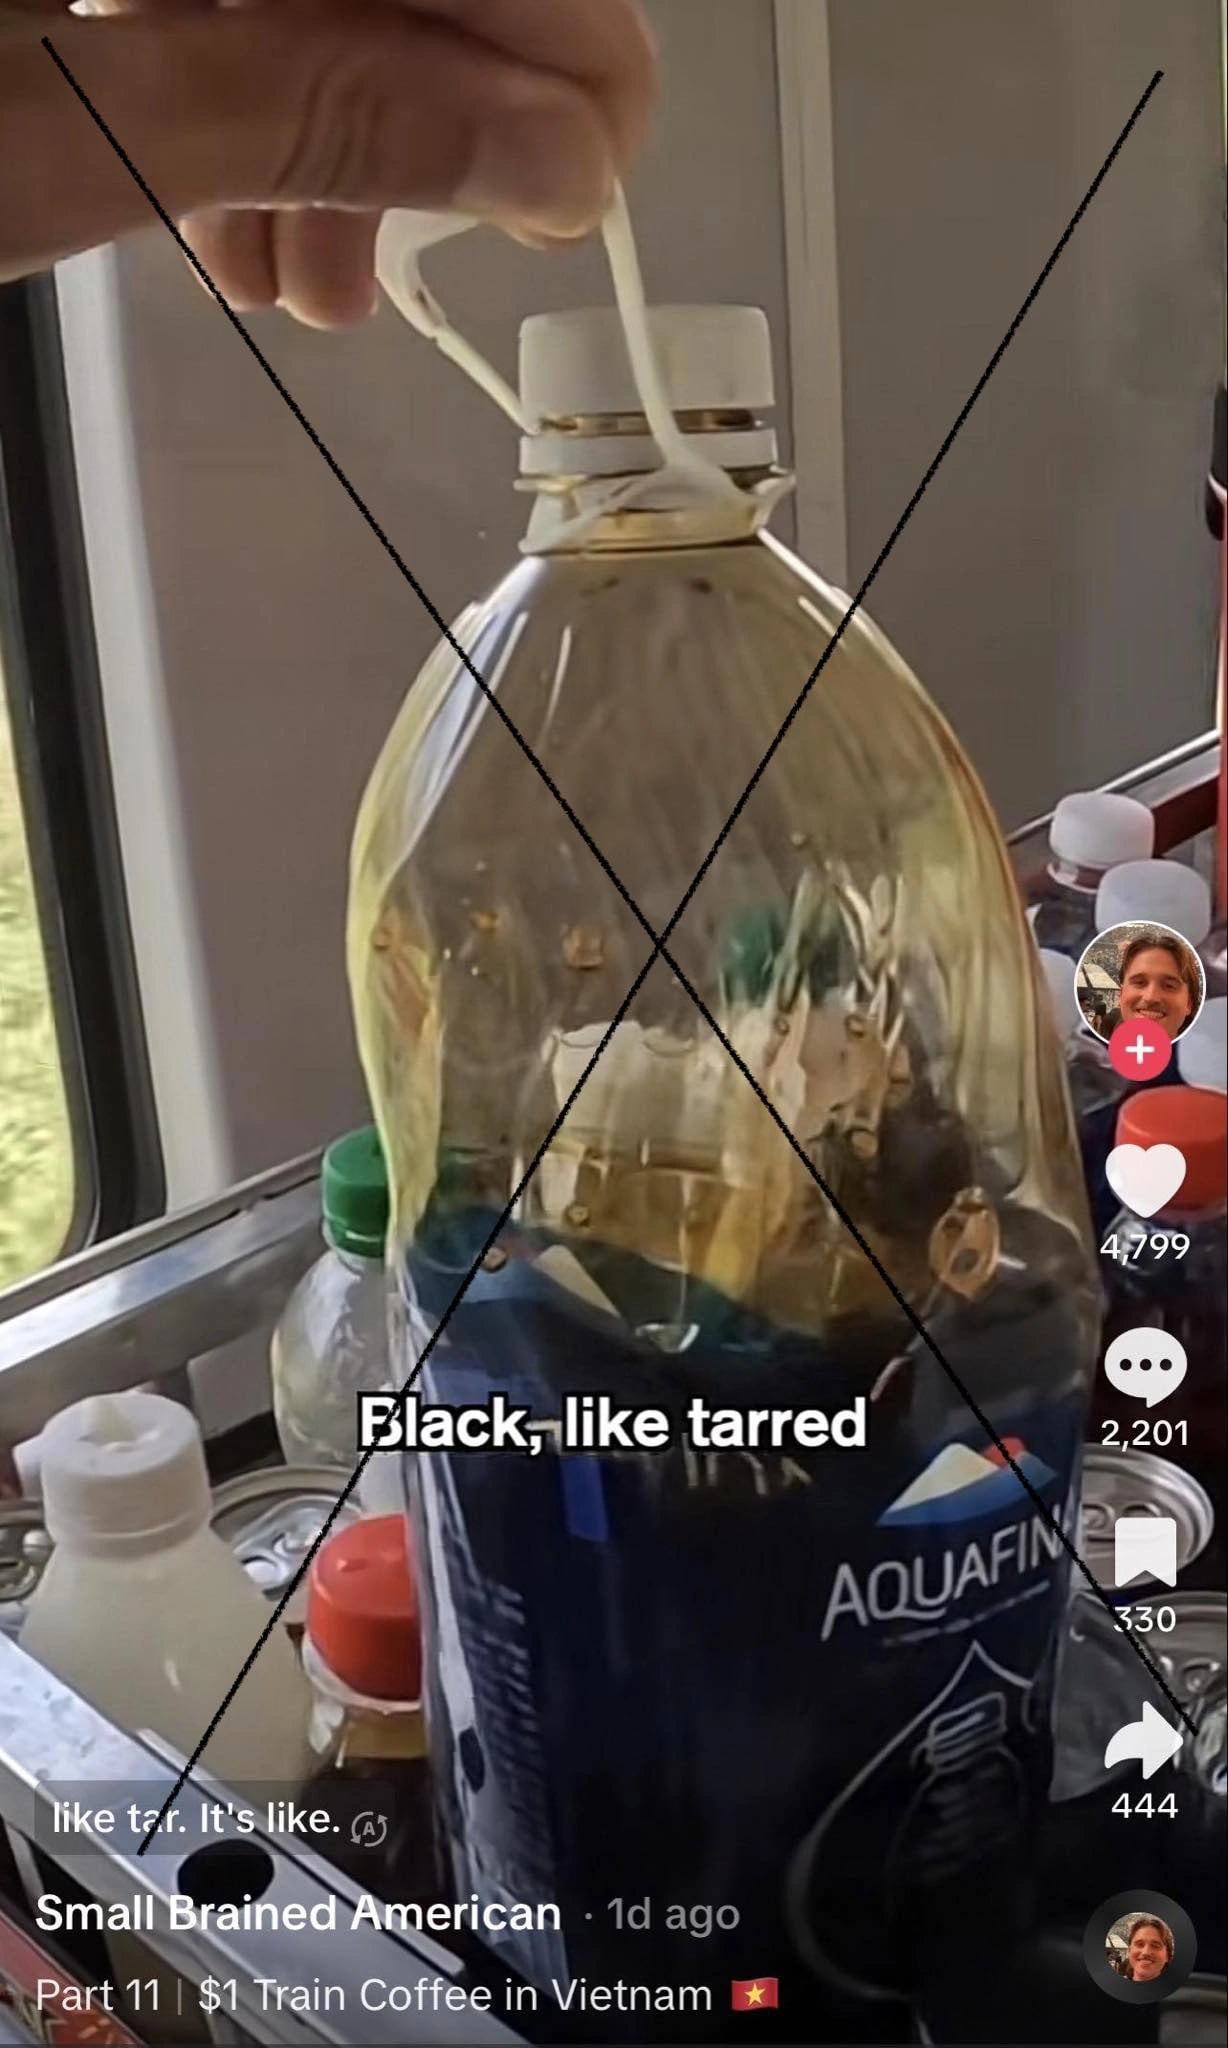 A screen shot from a video of Small Brained American shows a bottle of black coffee on a Vietnam's train that was said to be 'black like tarred'.